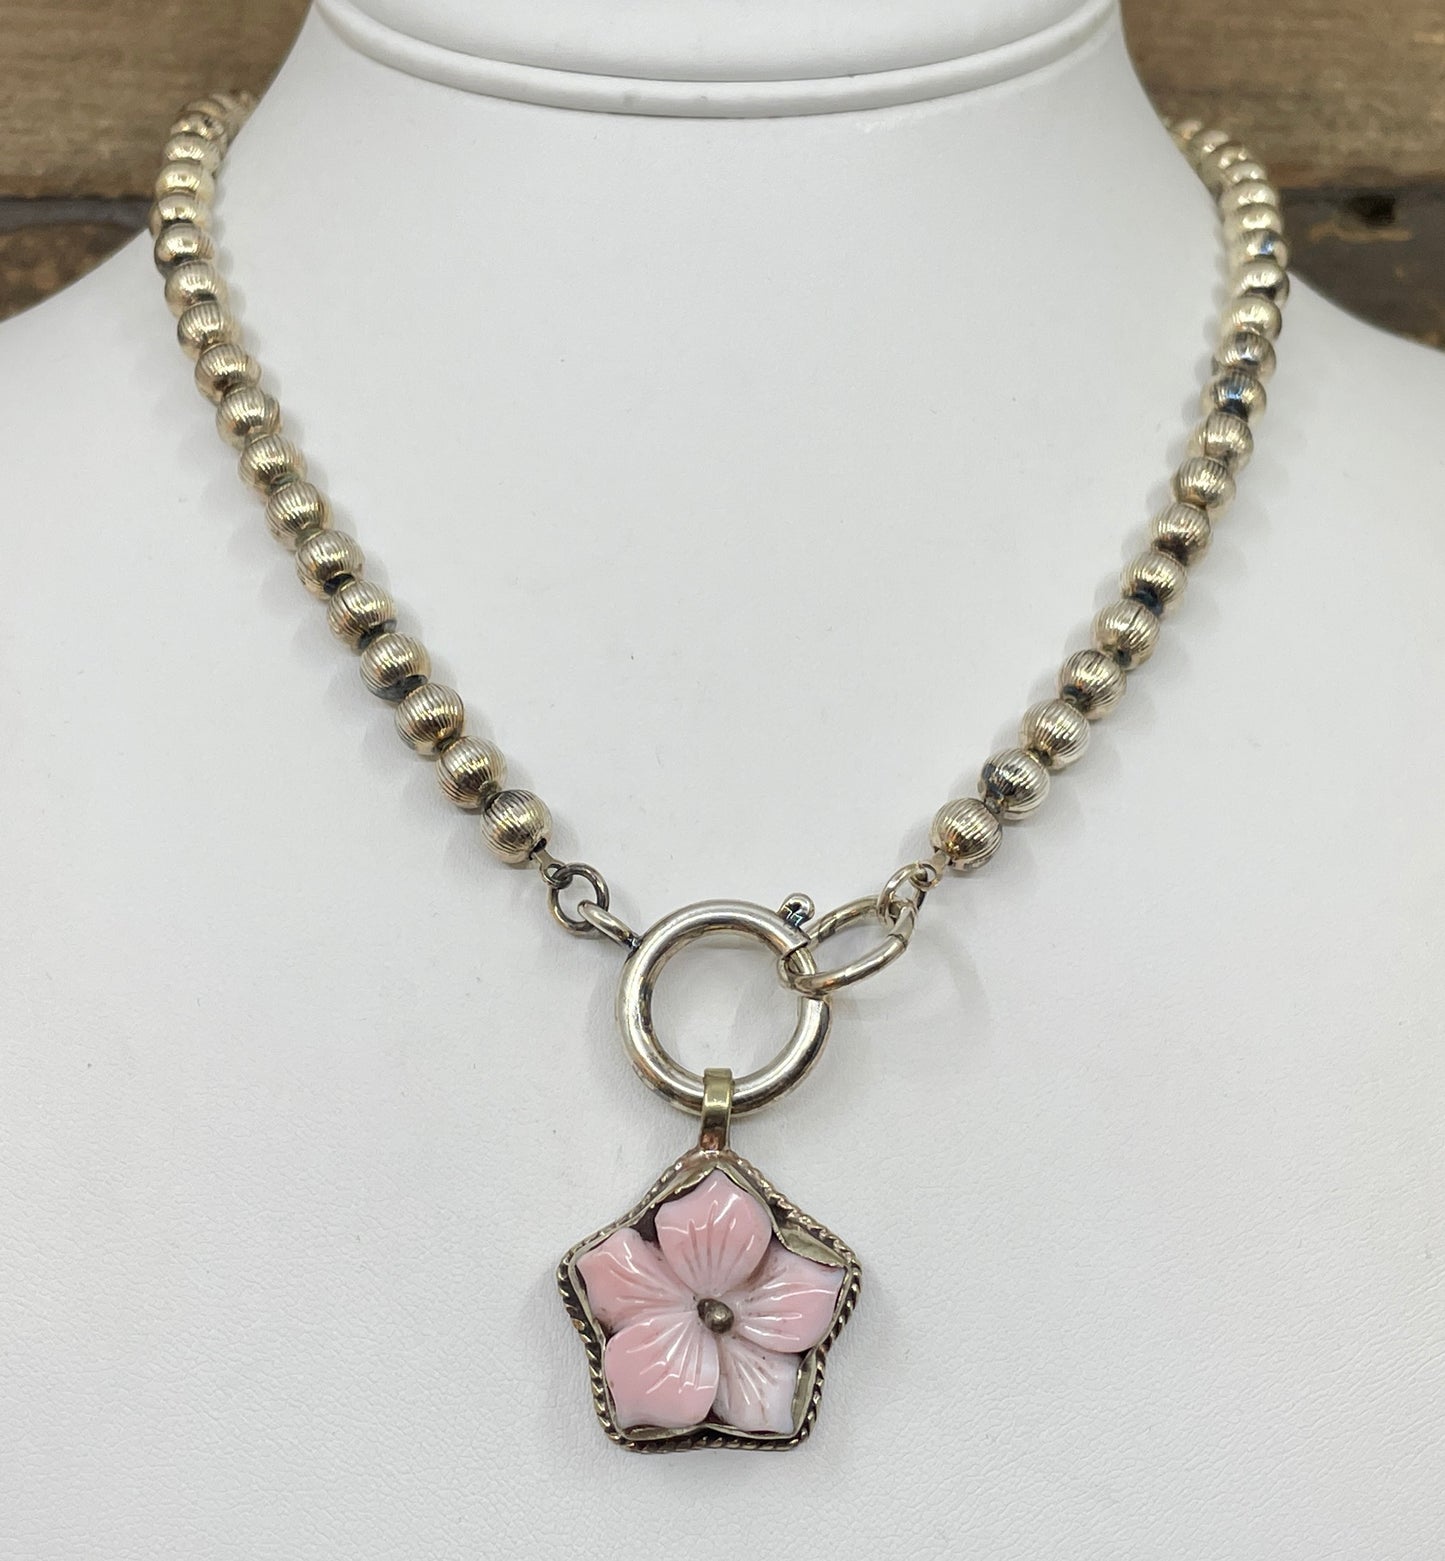 Small Pink Flower Pendant Necklace